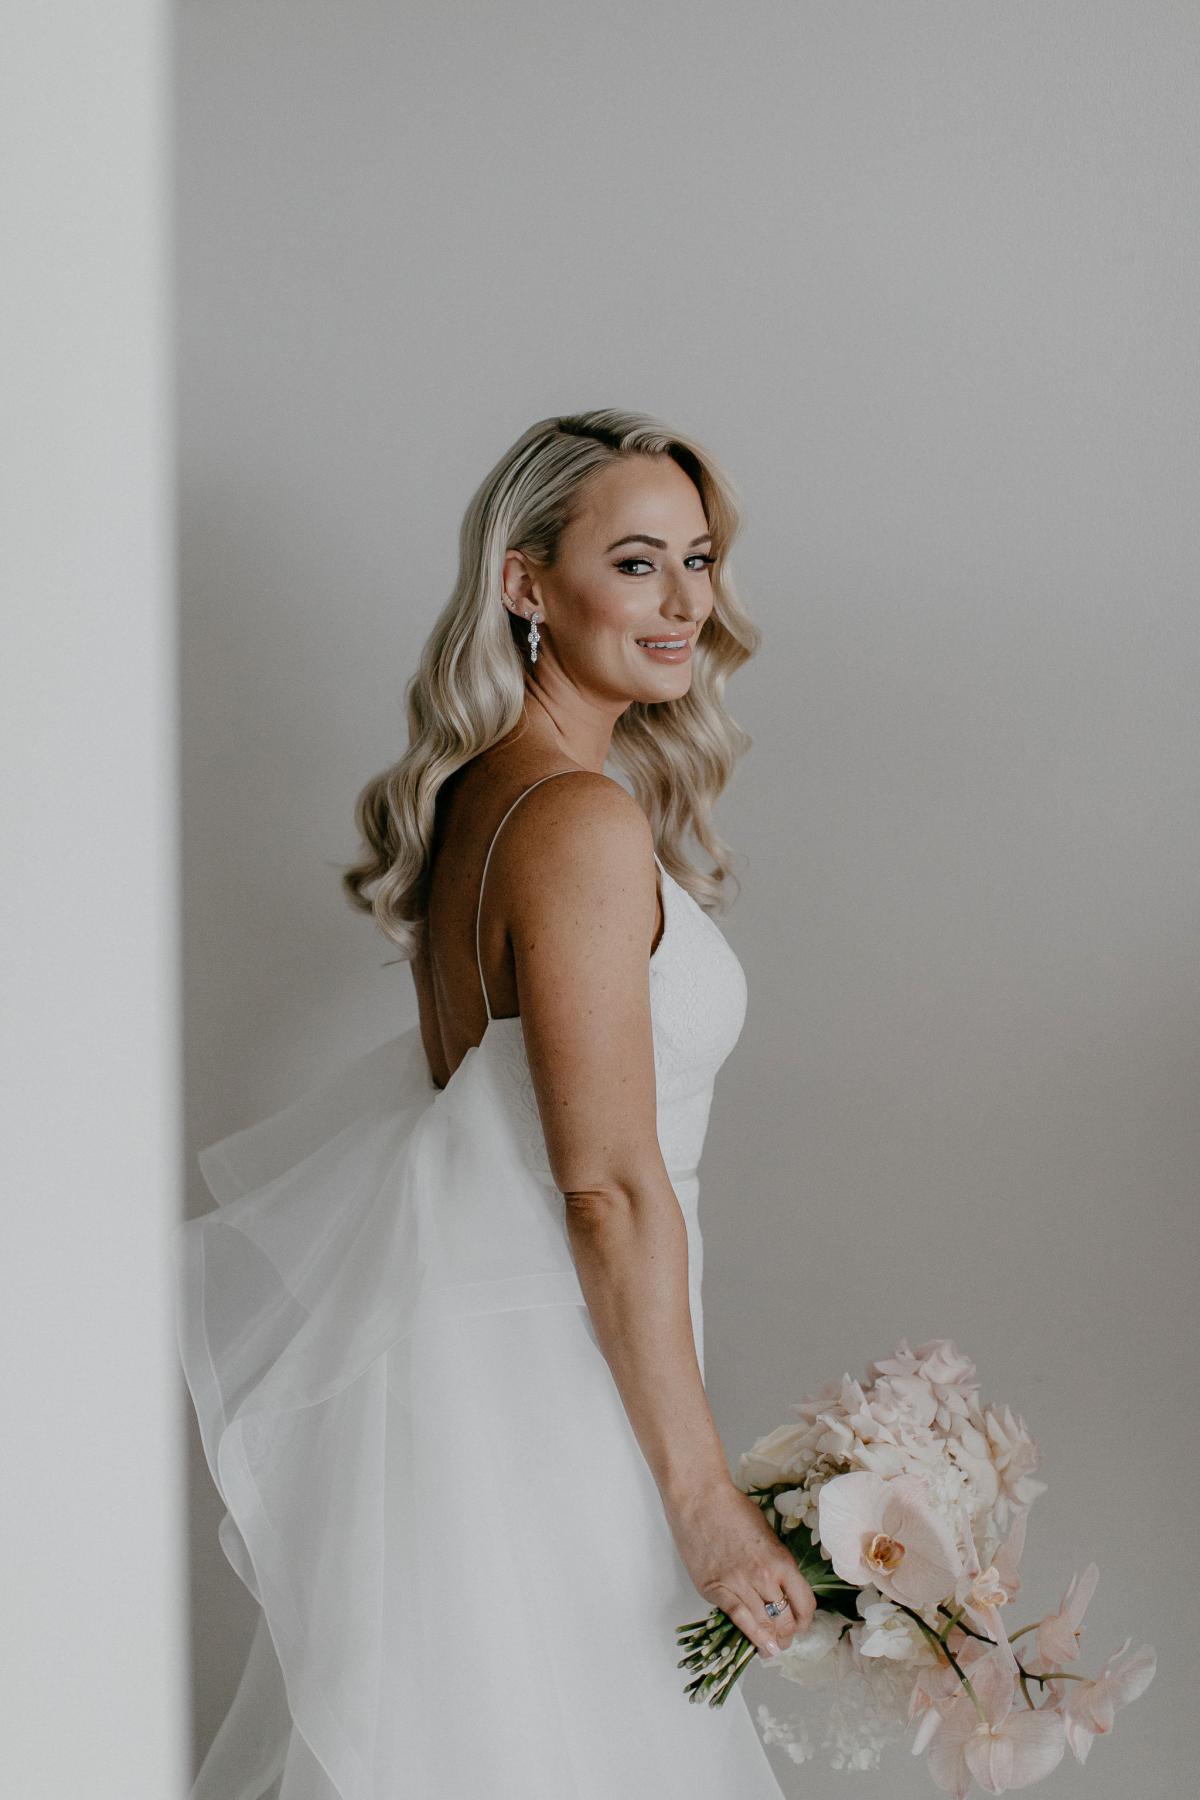 KWH real bride Nicole stands in against a gray wall for her bridal protraits wearing the trendy Justine gown with detachable Odette train and blush florals.